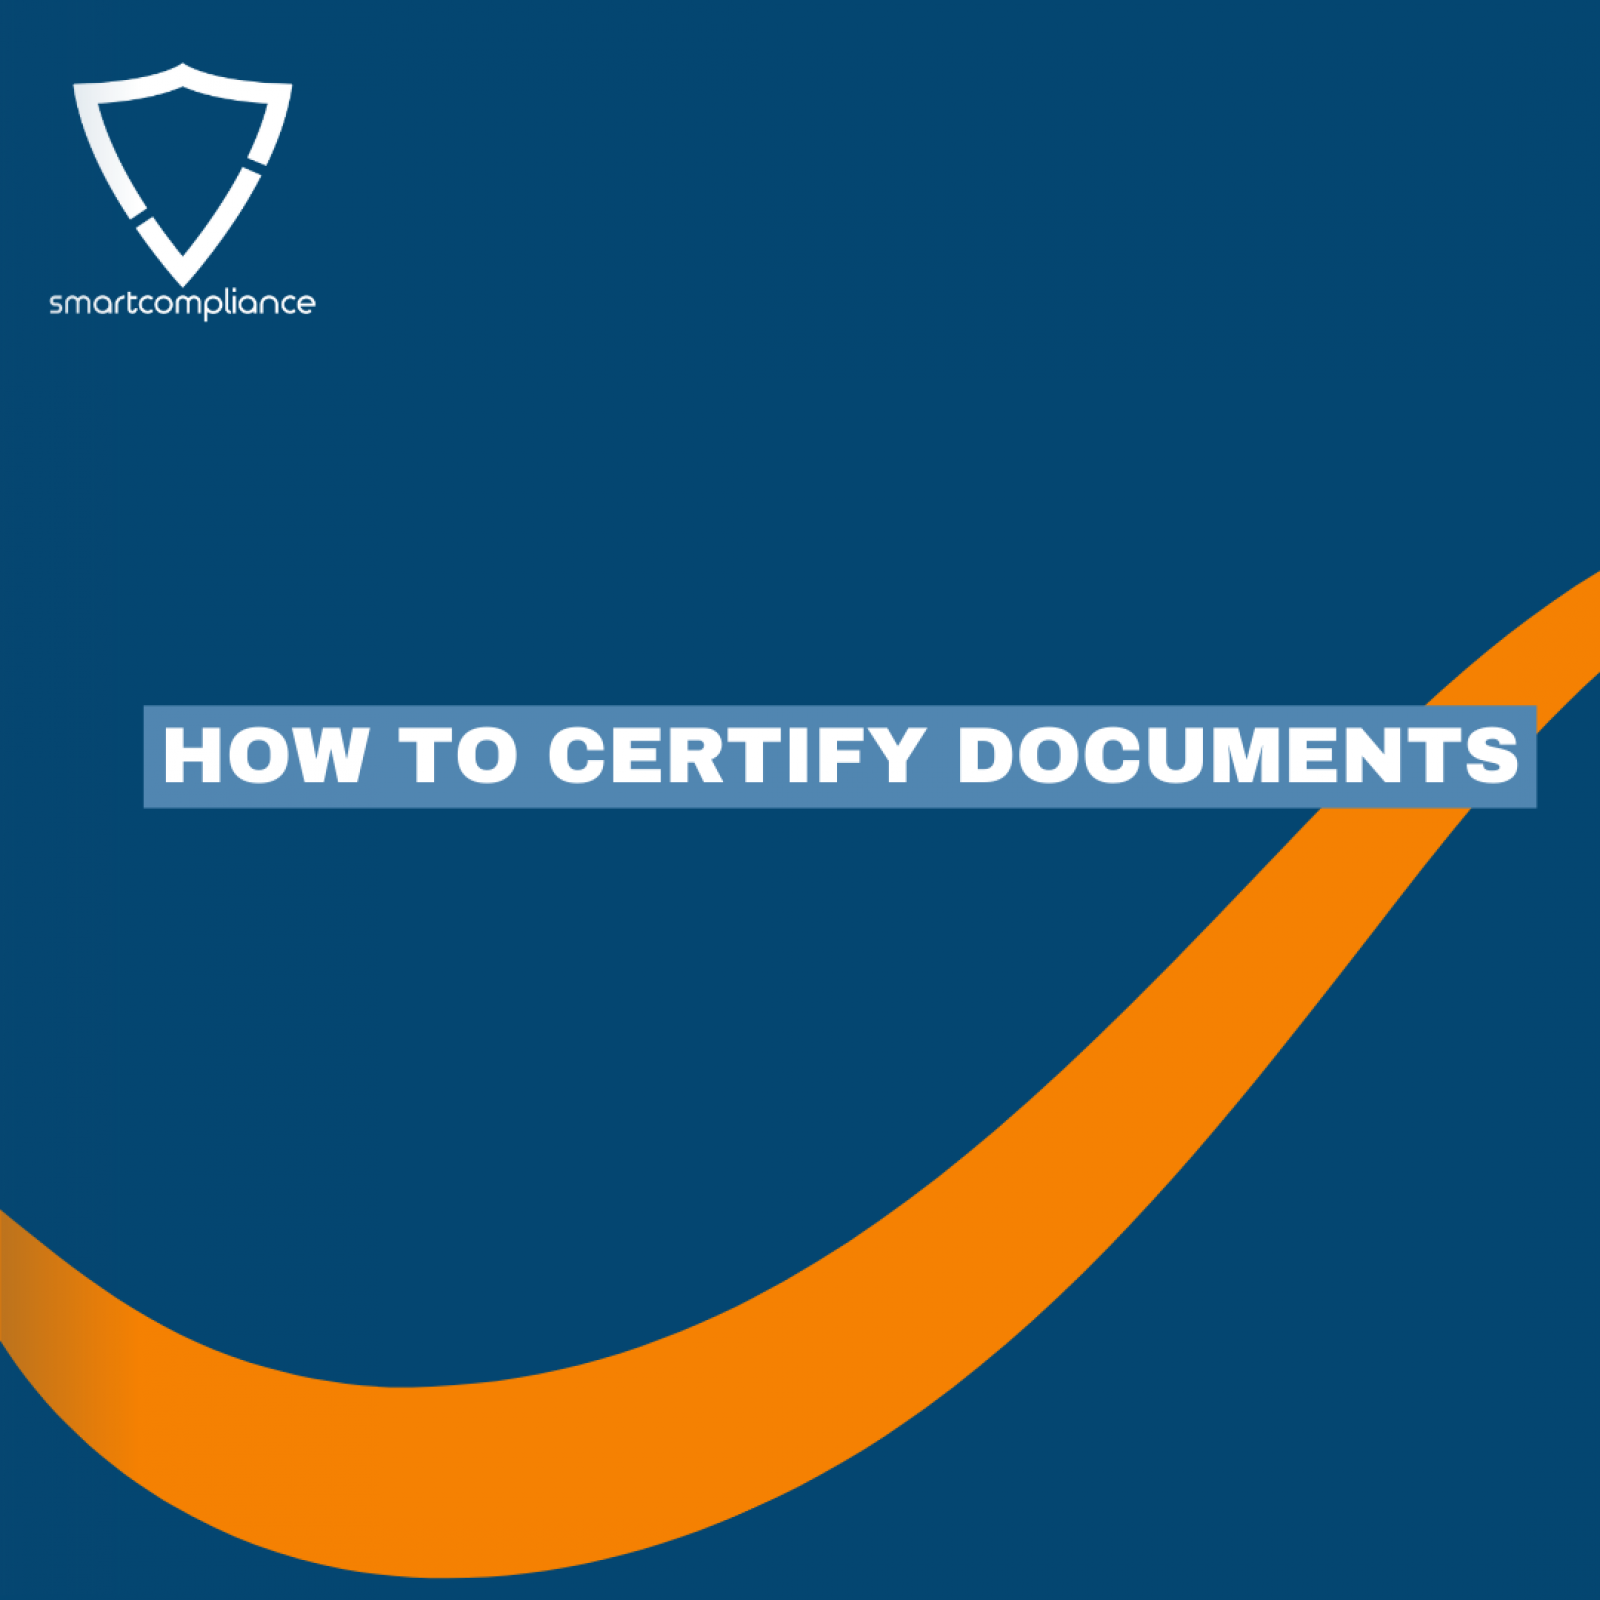 How to Certify Documents